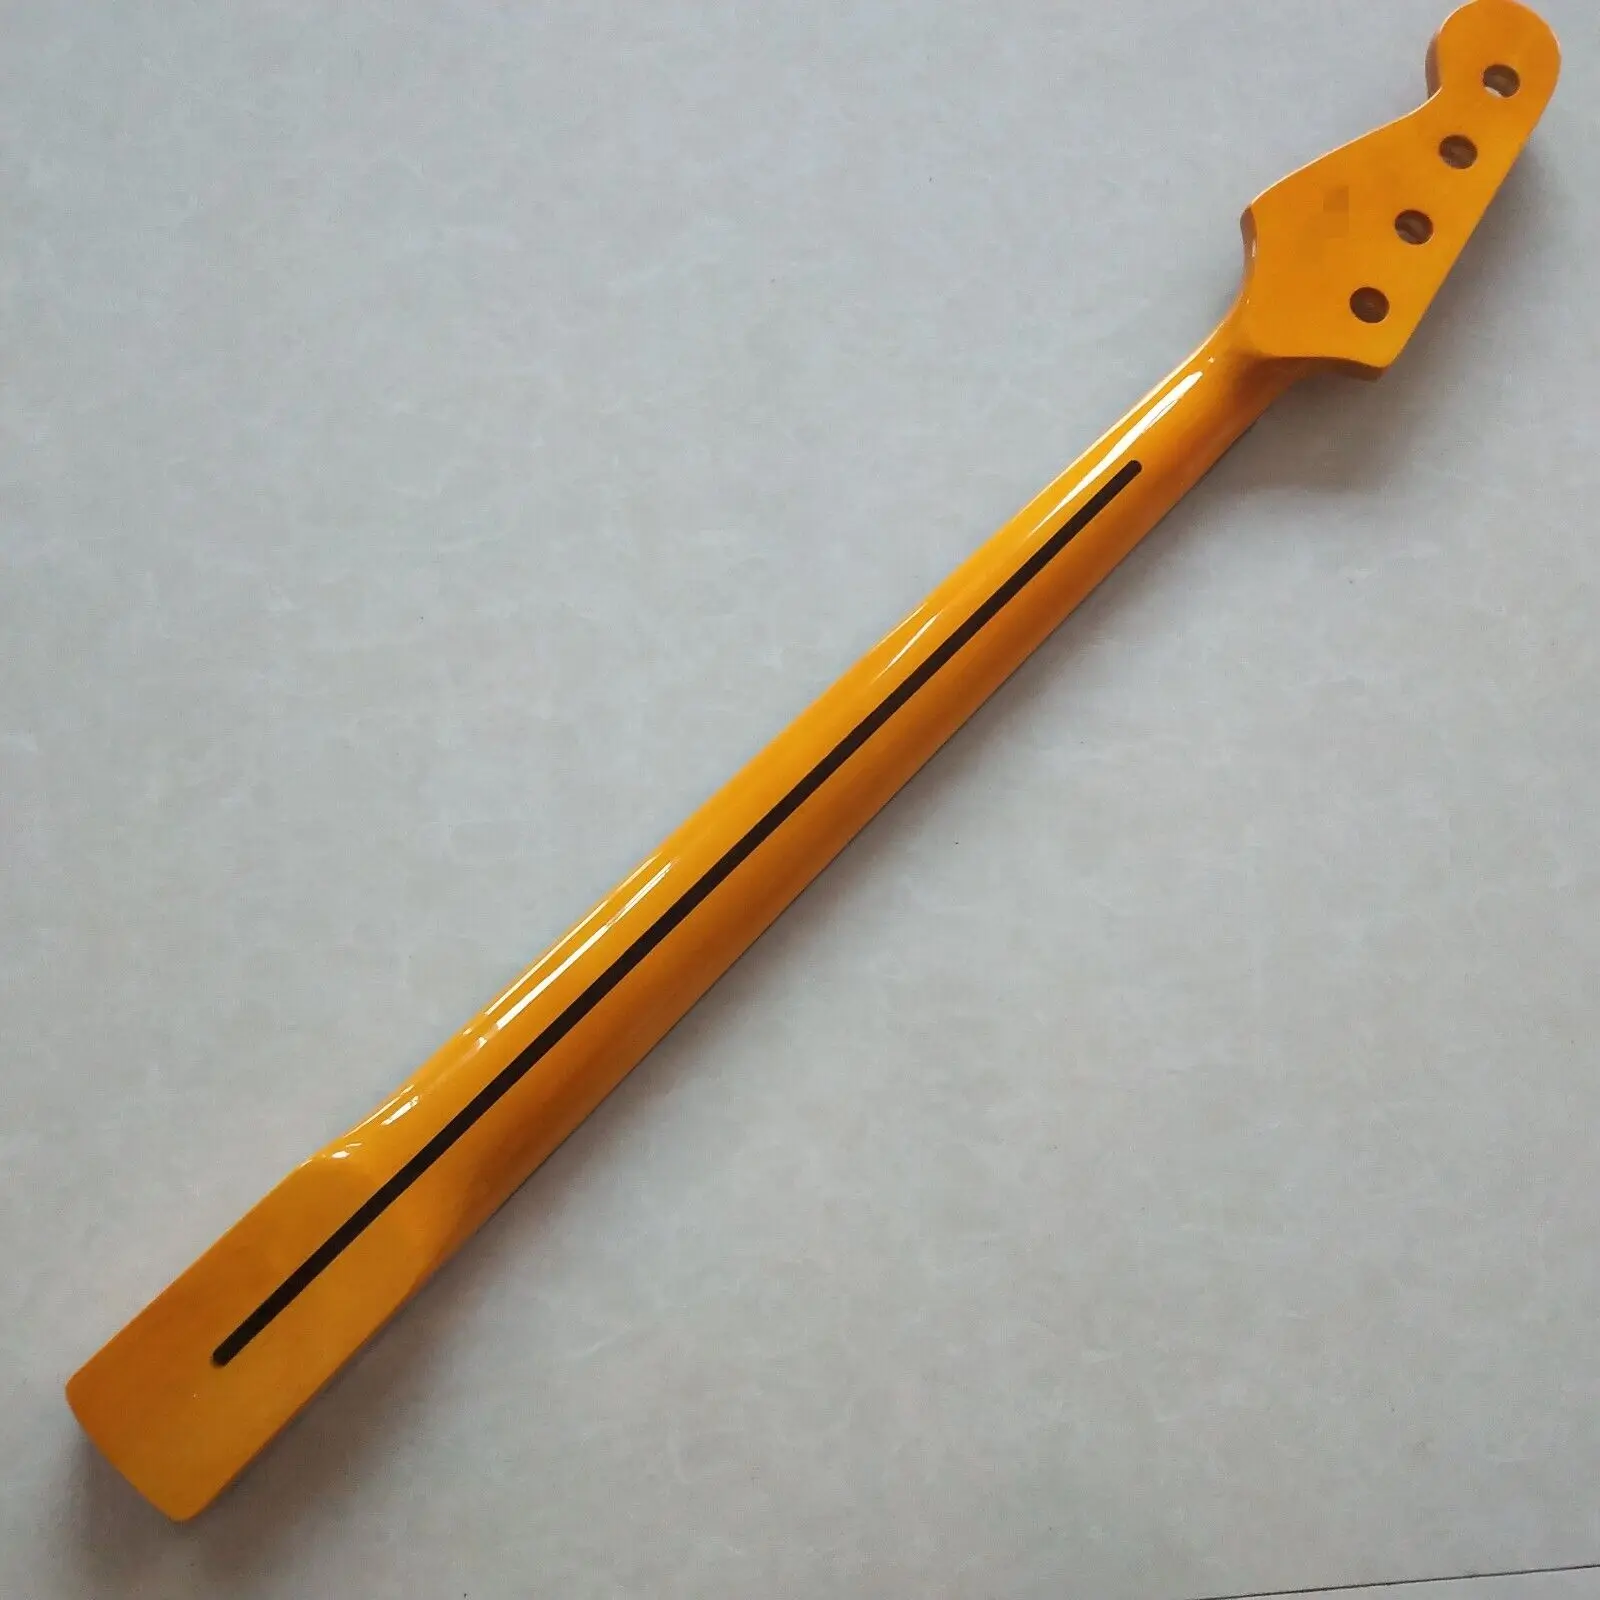 Gloss Yellow P bass guitar neck parts 20 fret 34inch Maple Fretboard Block Inlay enlarge